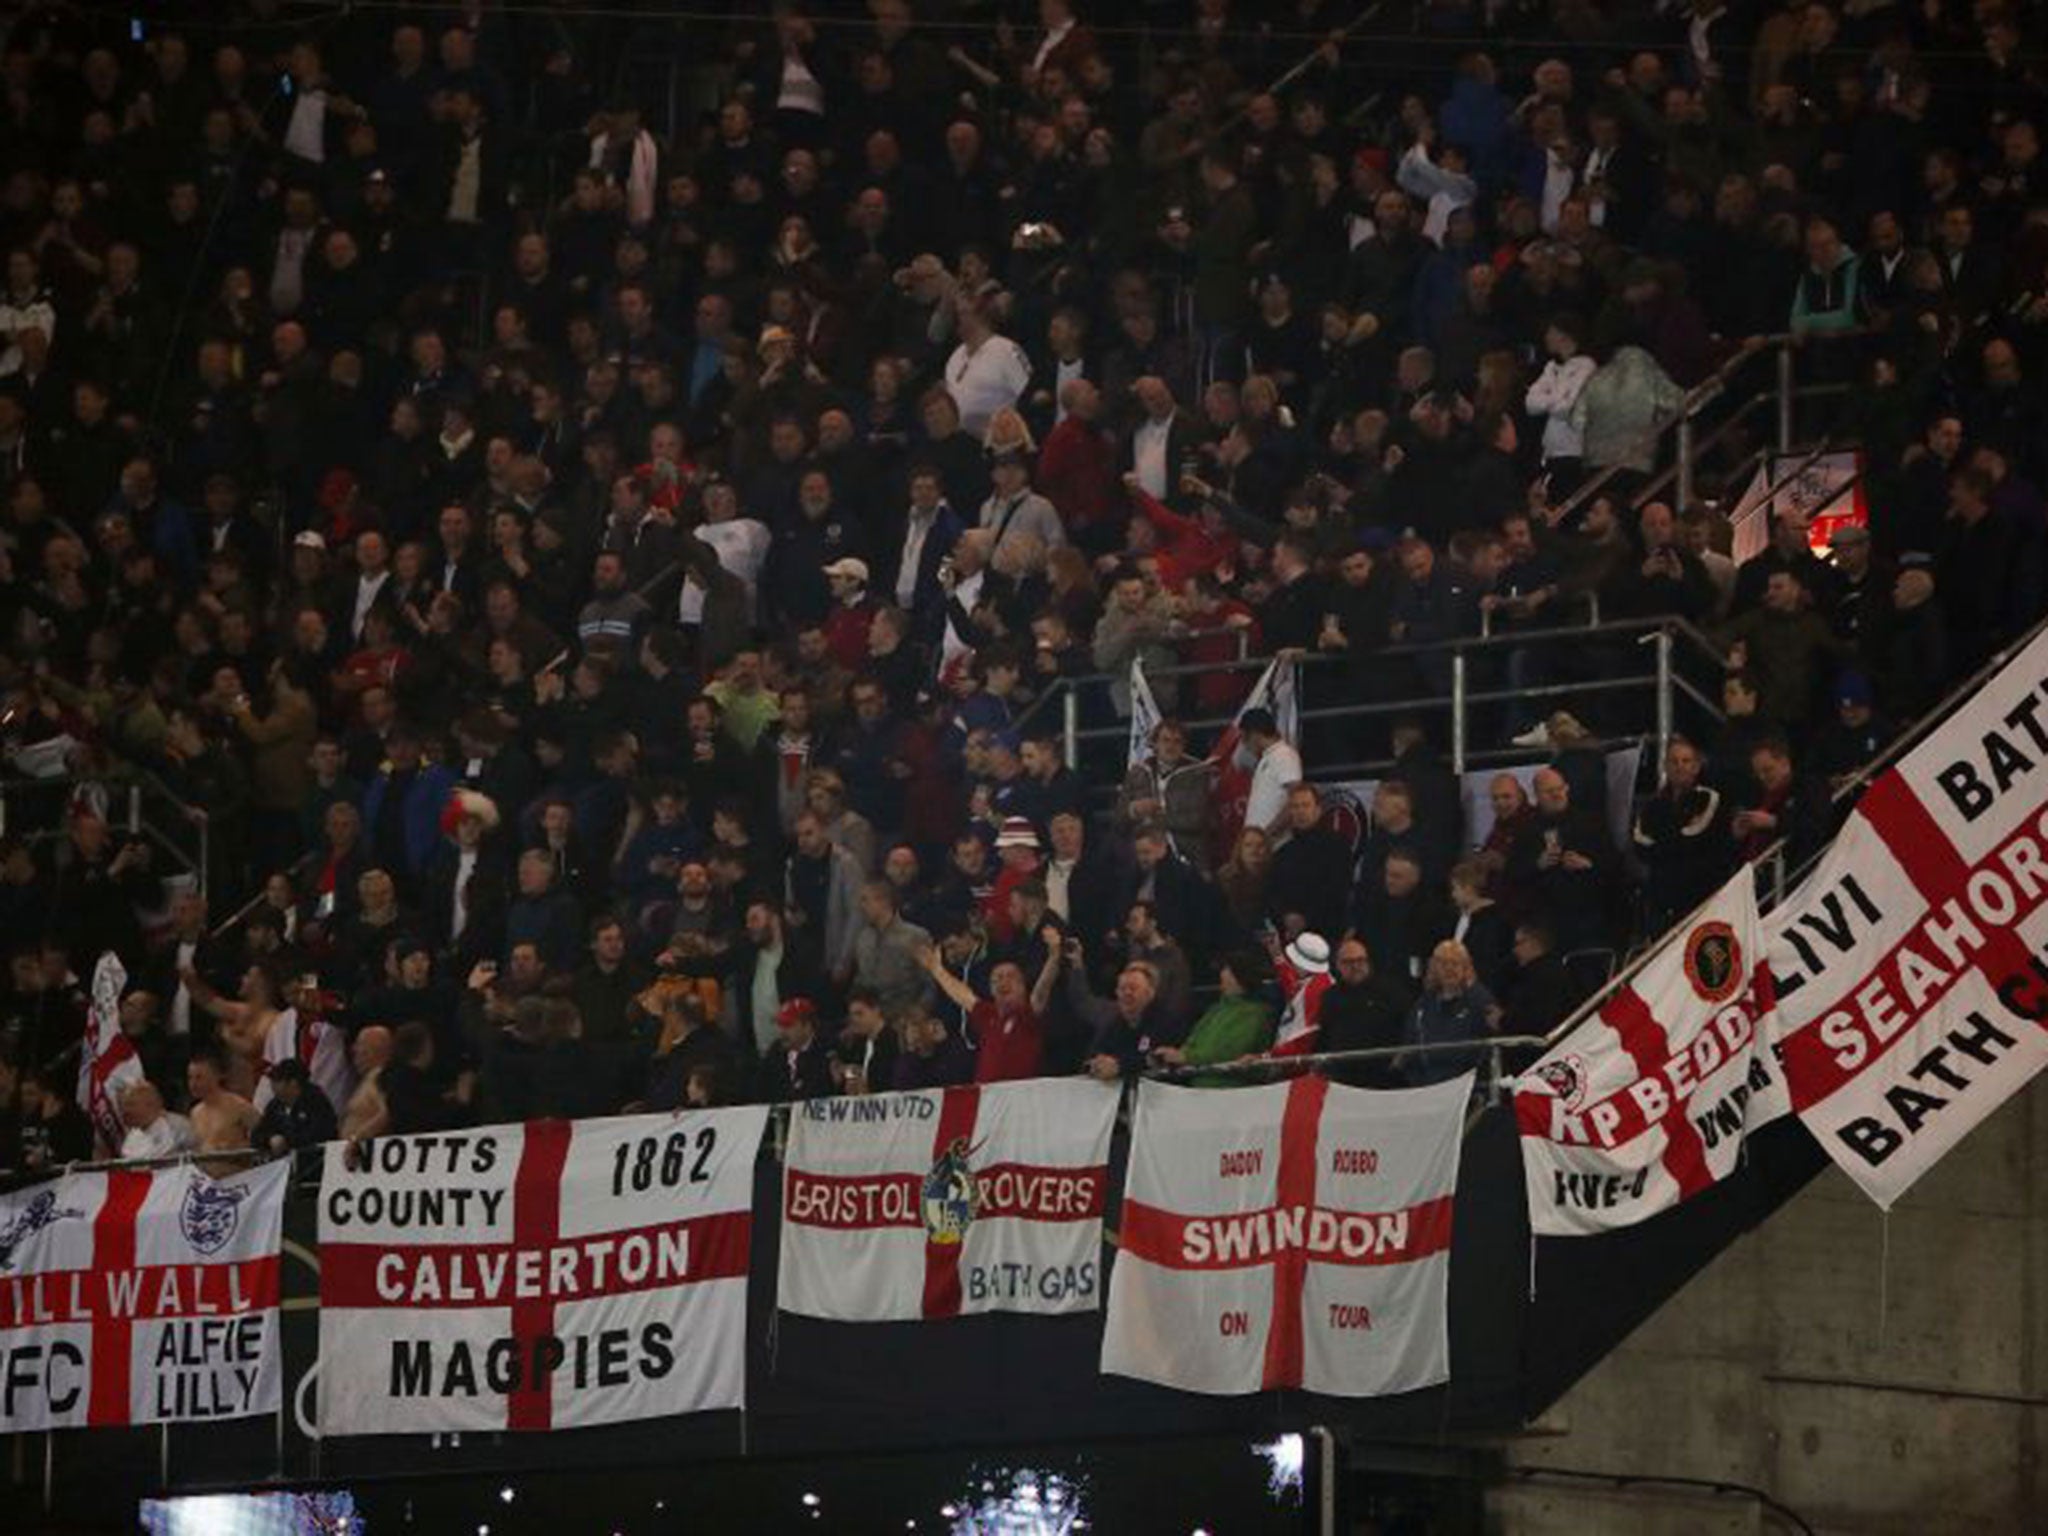 England fans chanted disgraceful songs aimed at Germany supporters